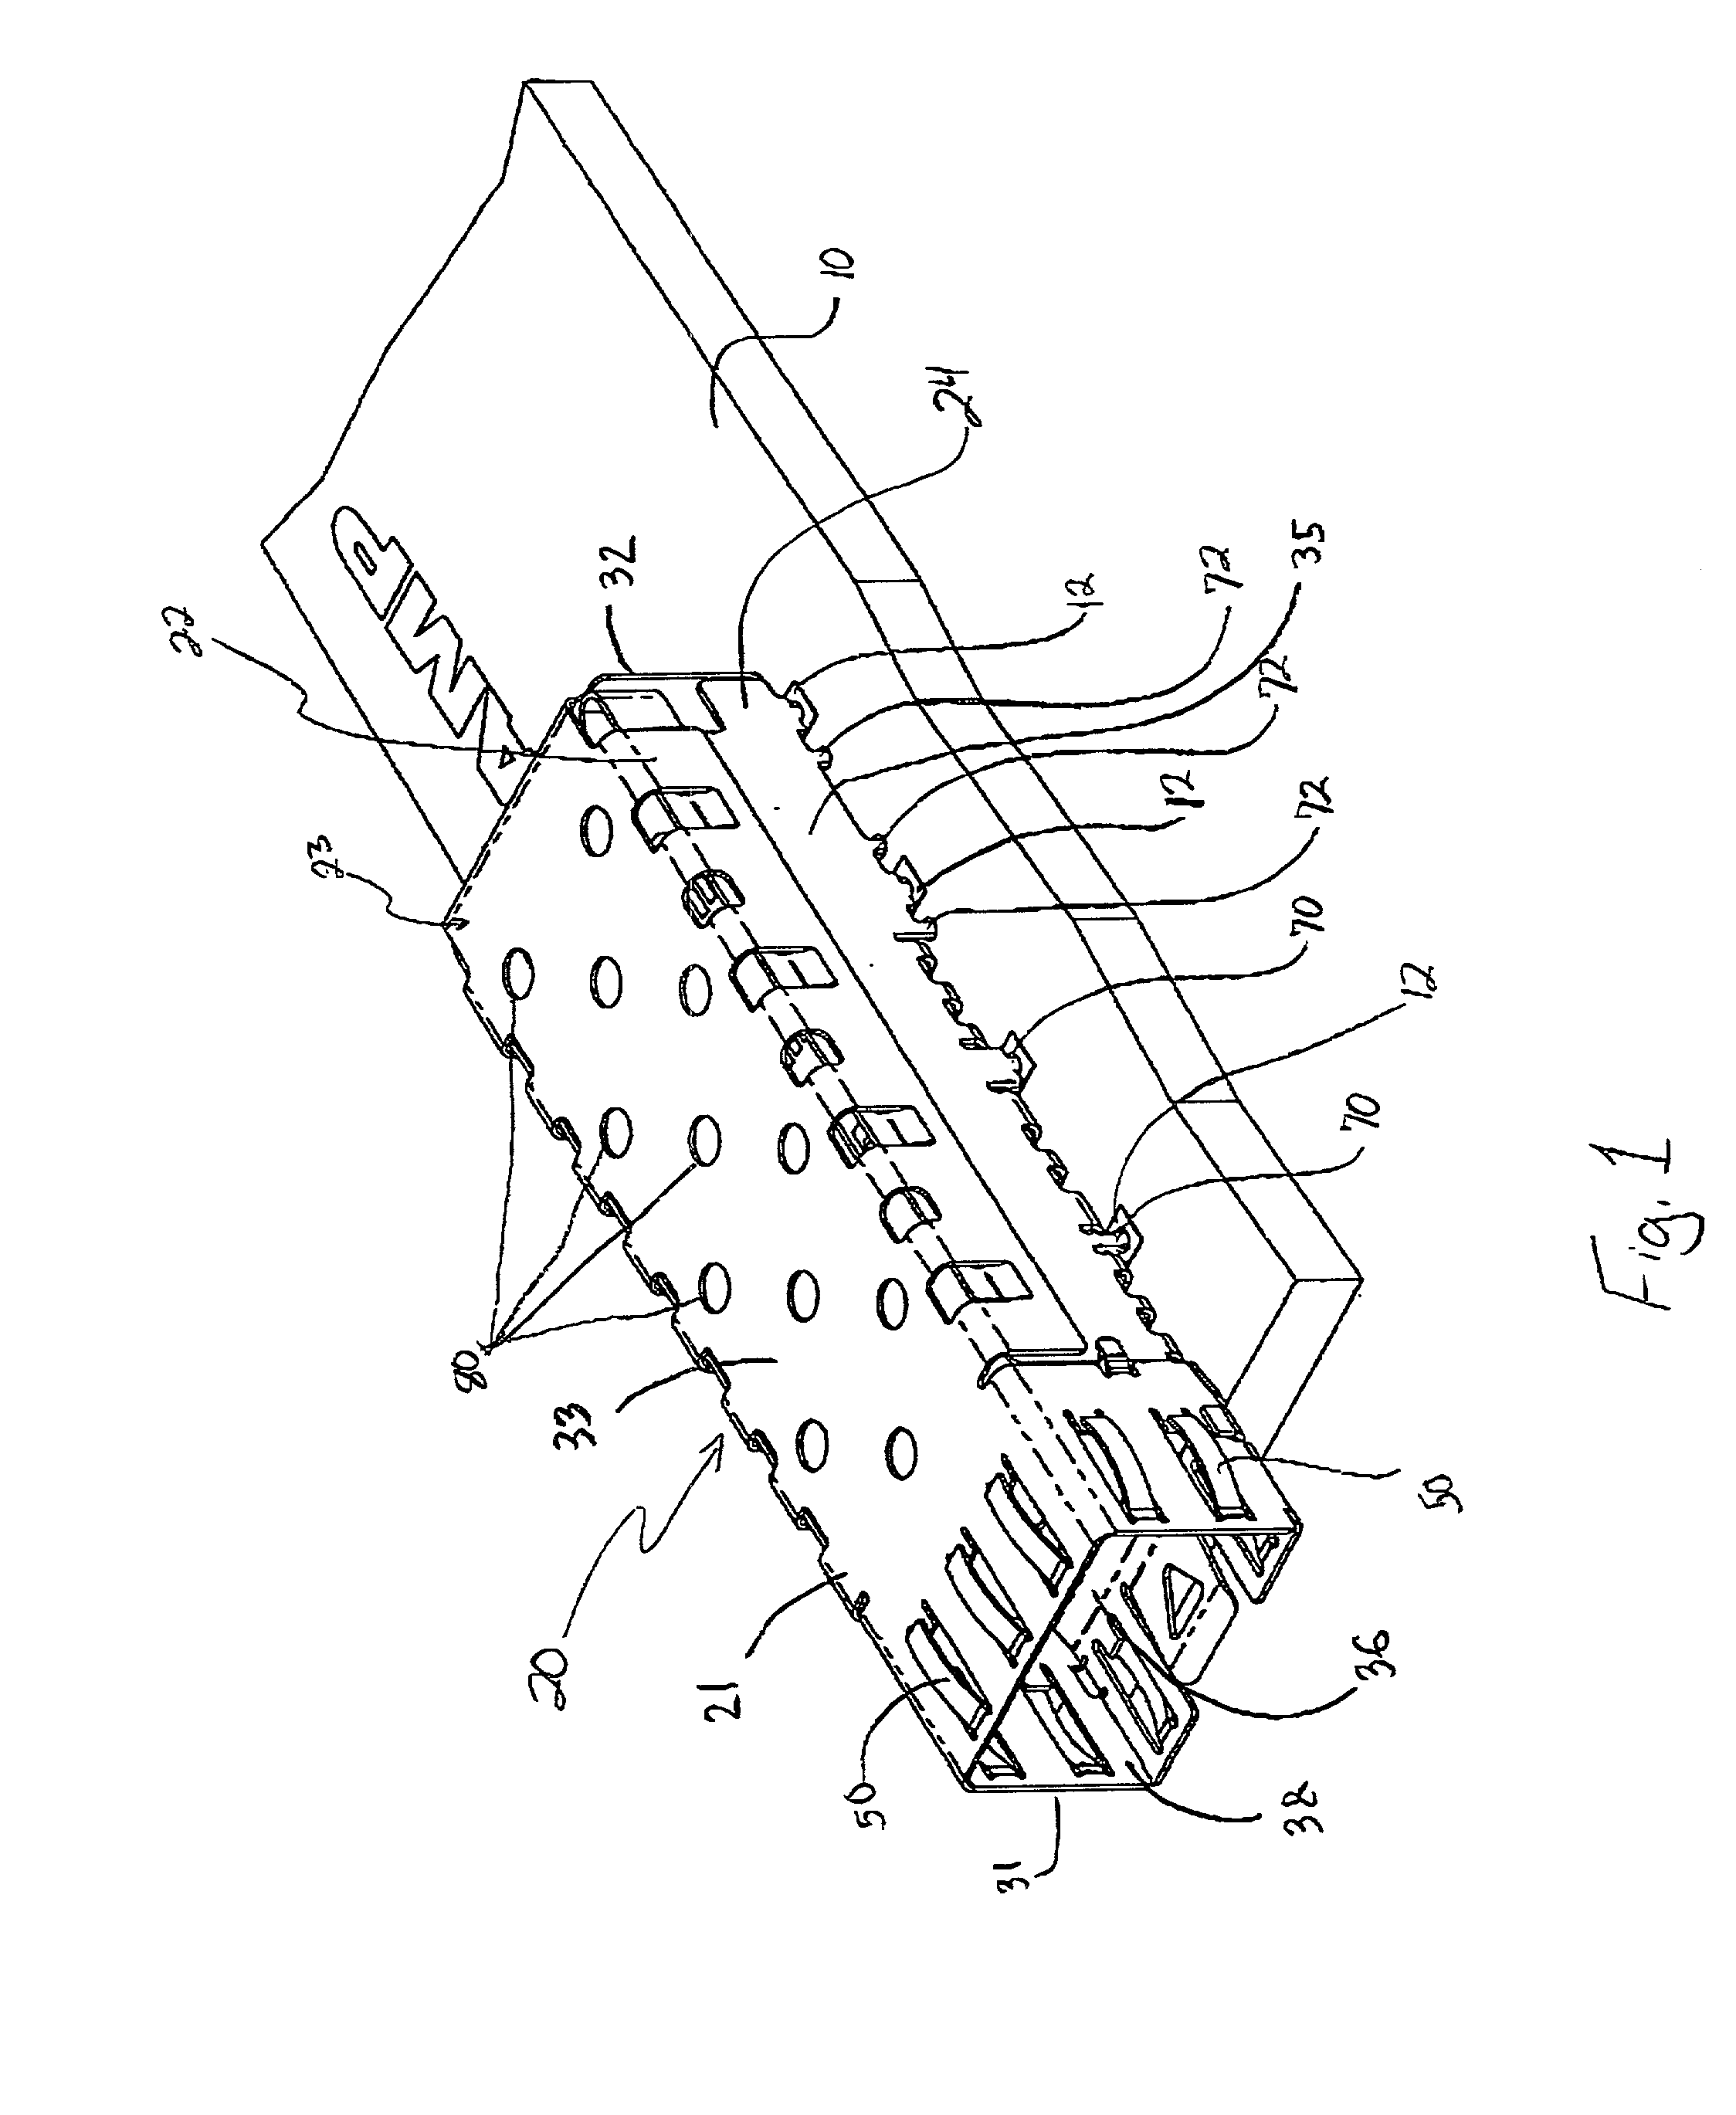 Pluggable module and receptacle